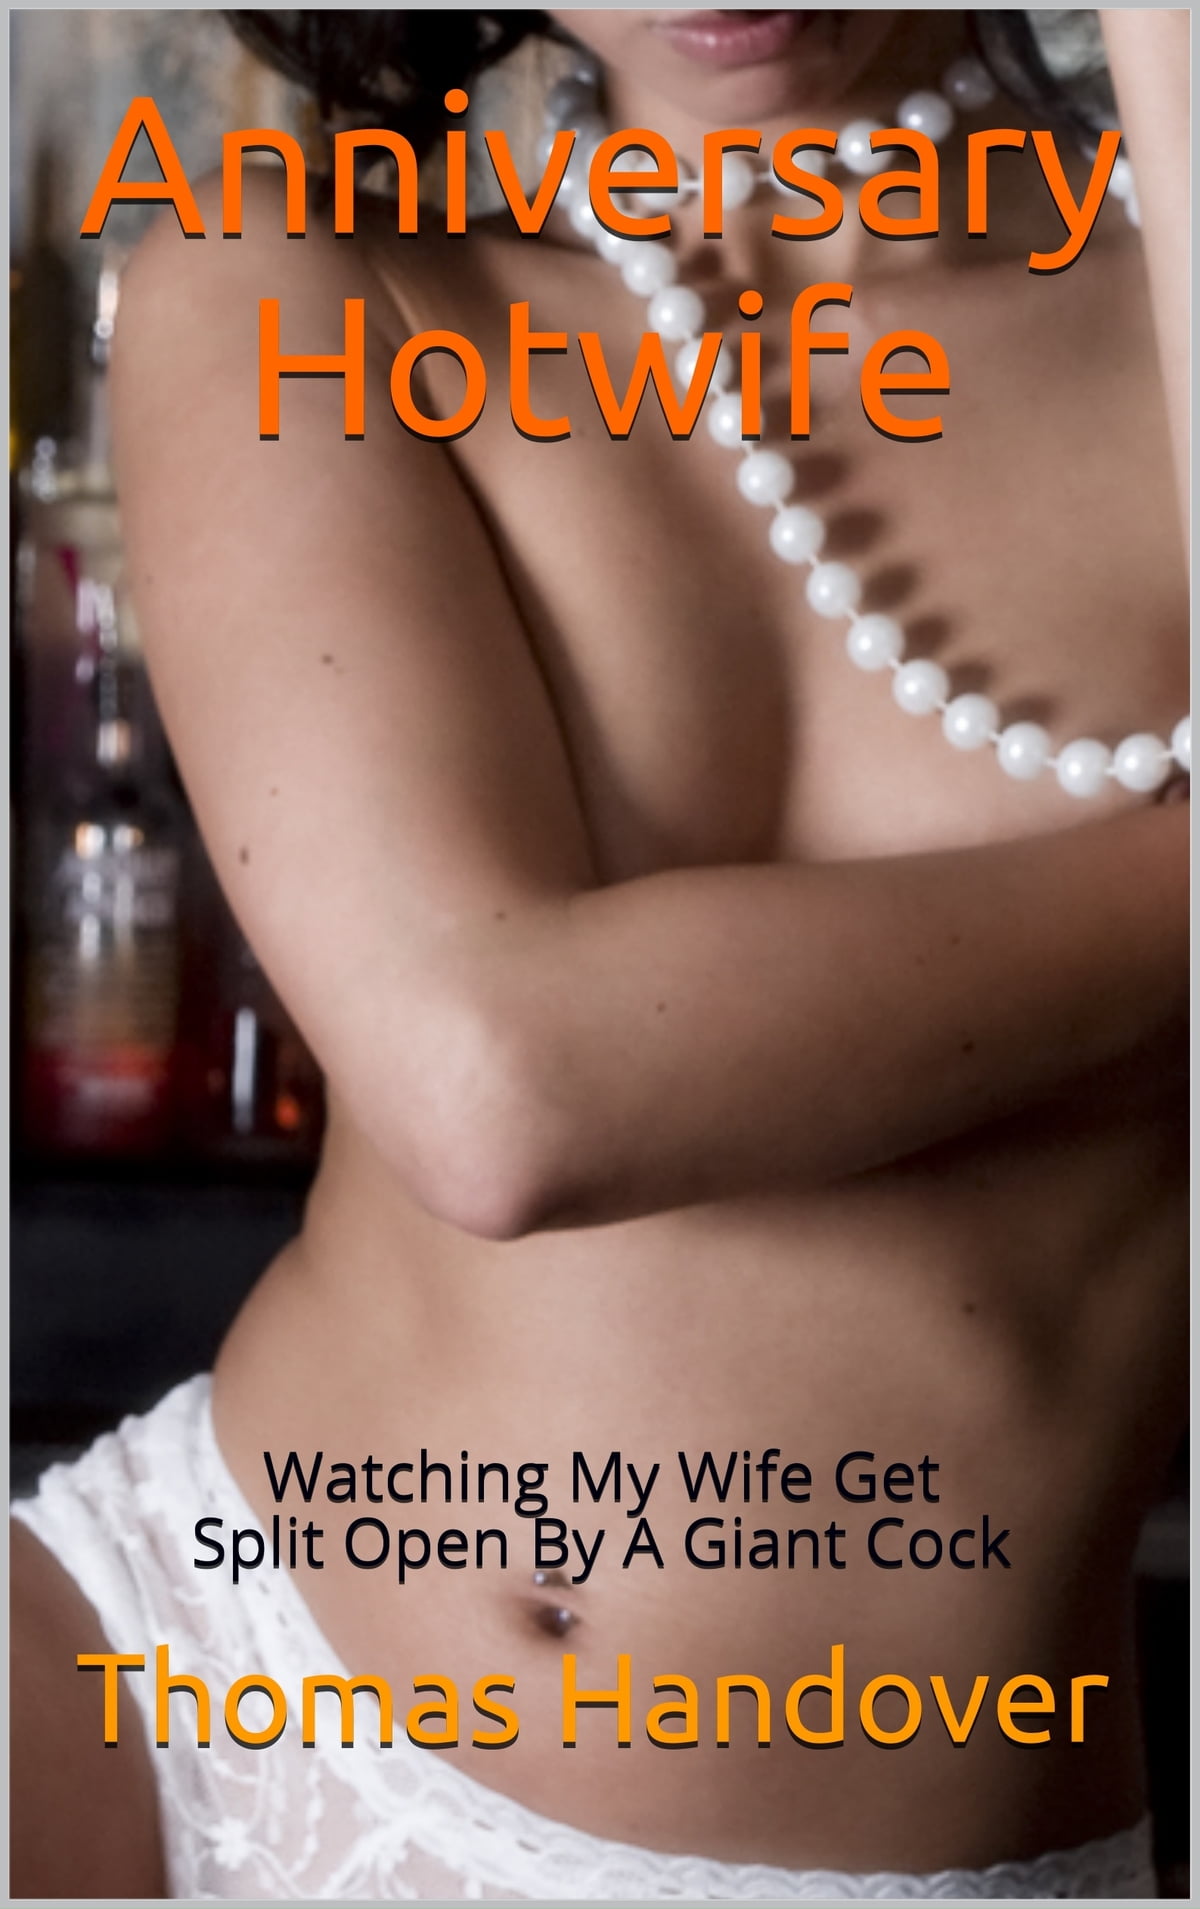 The E. Q. reccomend host hotwife cums hard with